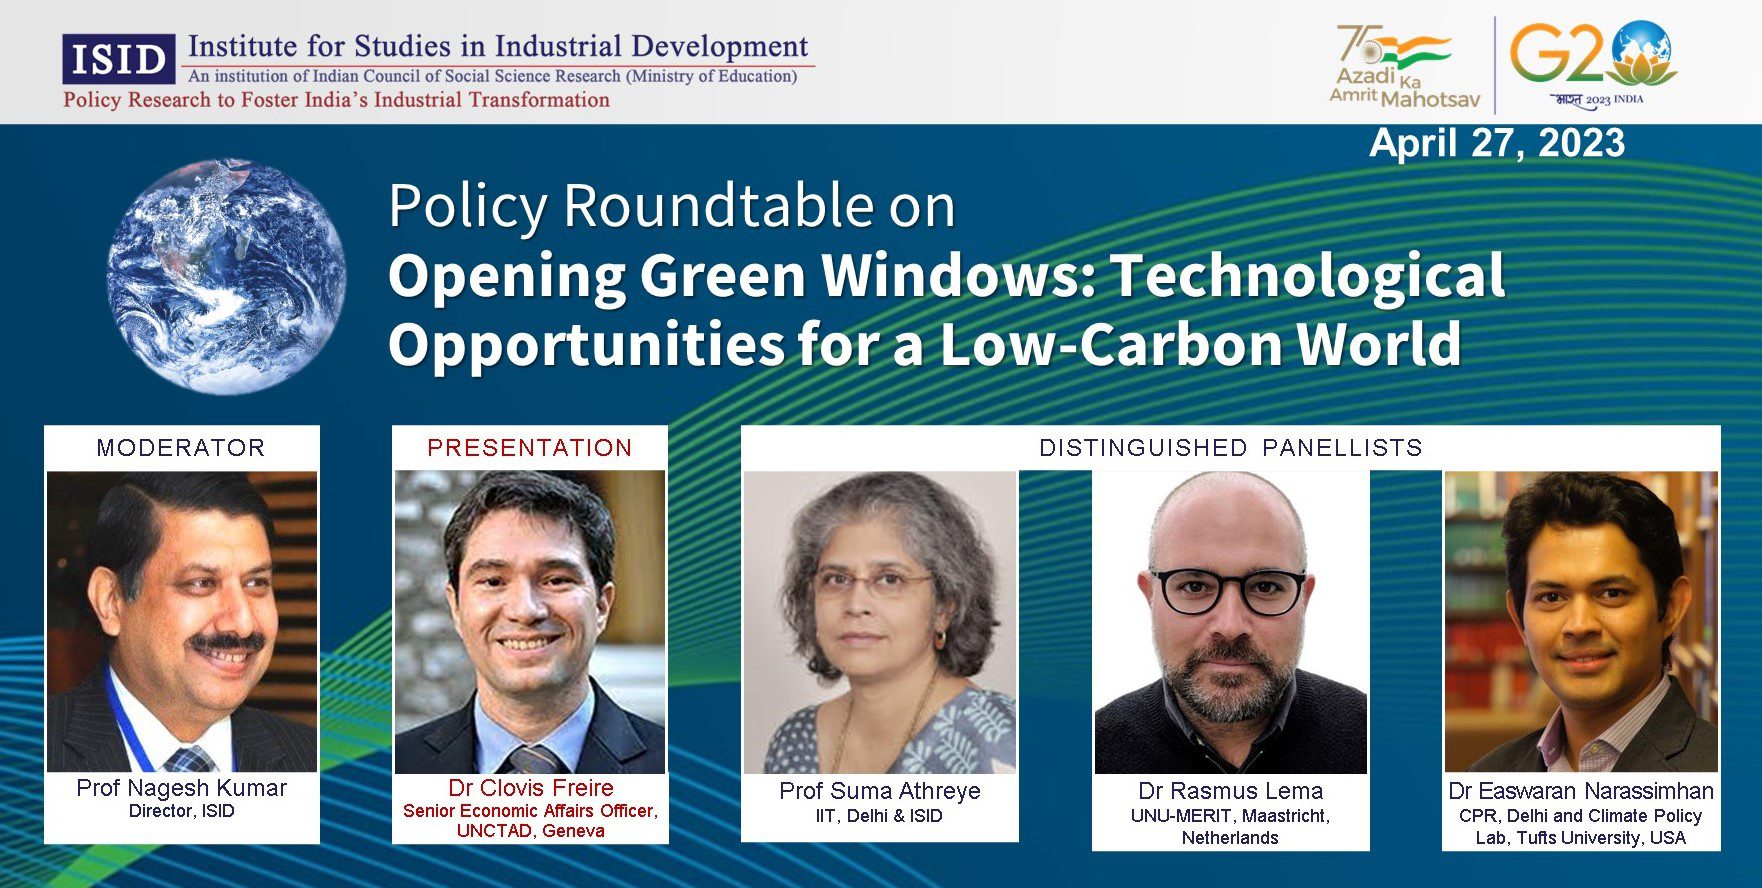 Policy Roundtable on Opening Green Windows: Technological Opportunities for a Low-Carbon World